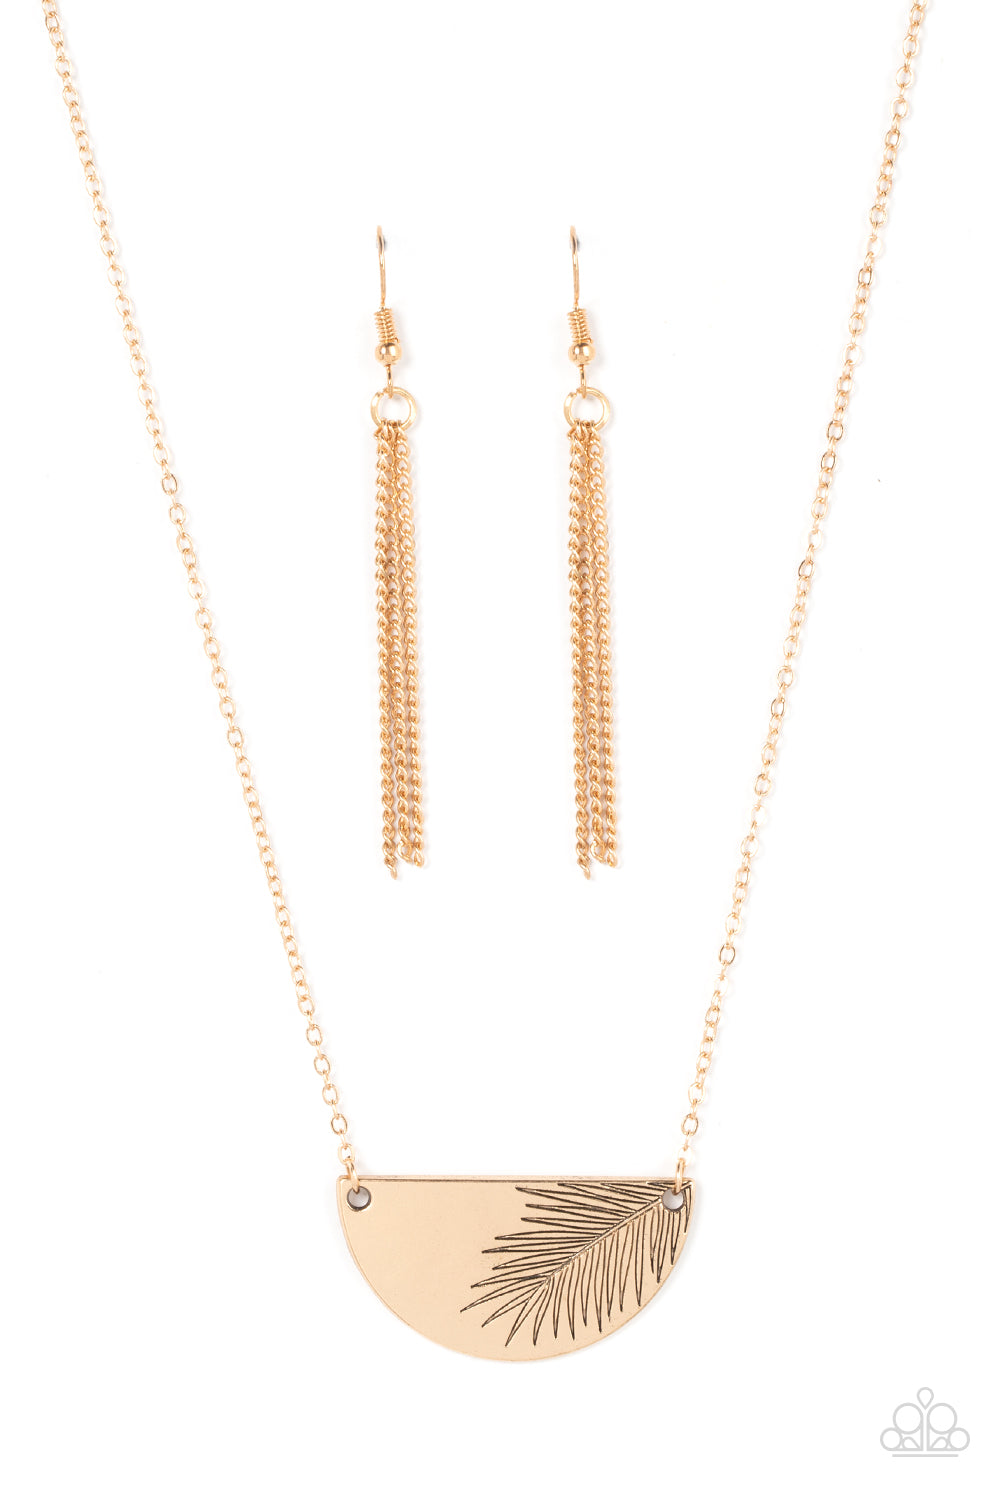 ​Suspended between the center of a dainty gold chain, a glistening gold half moon plate is stamped in an antiqued palm leaf for a seasonal flair. Features an adjustable clasp closure.